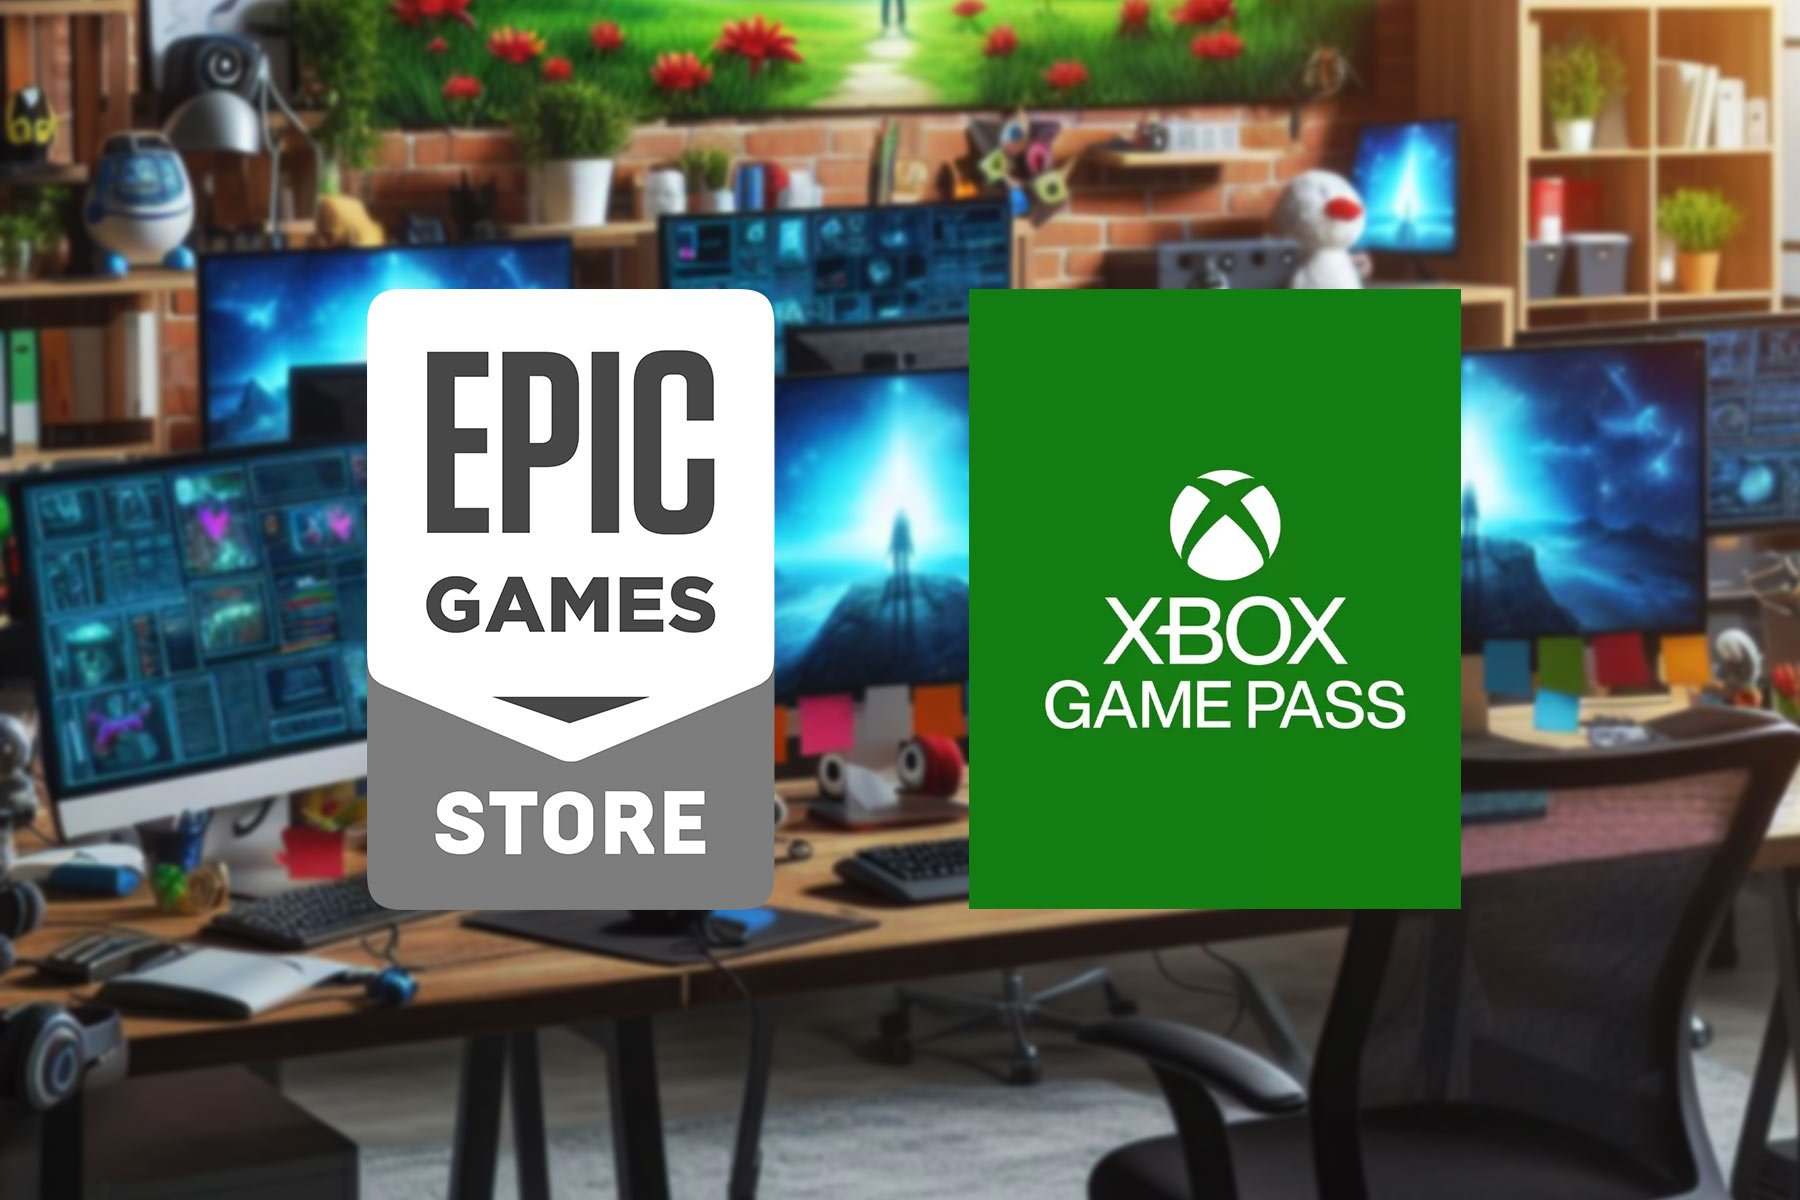 Indie devs facing tough times as Epic Store and Xbox Game Pass cut funding